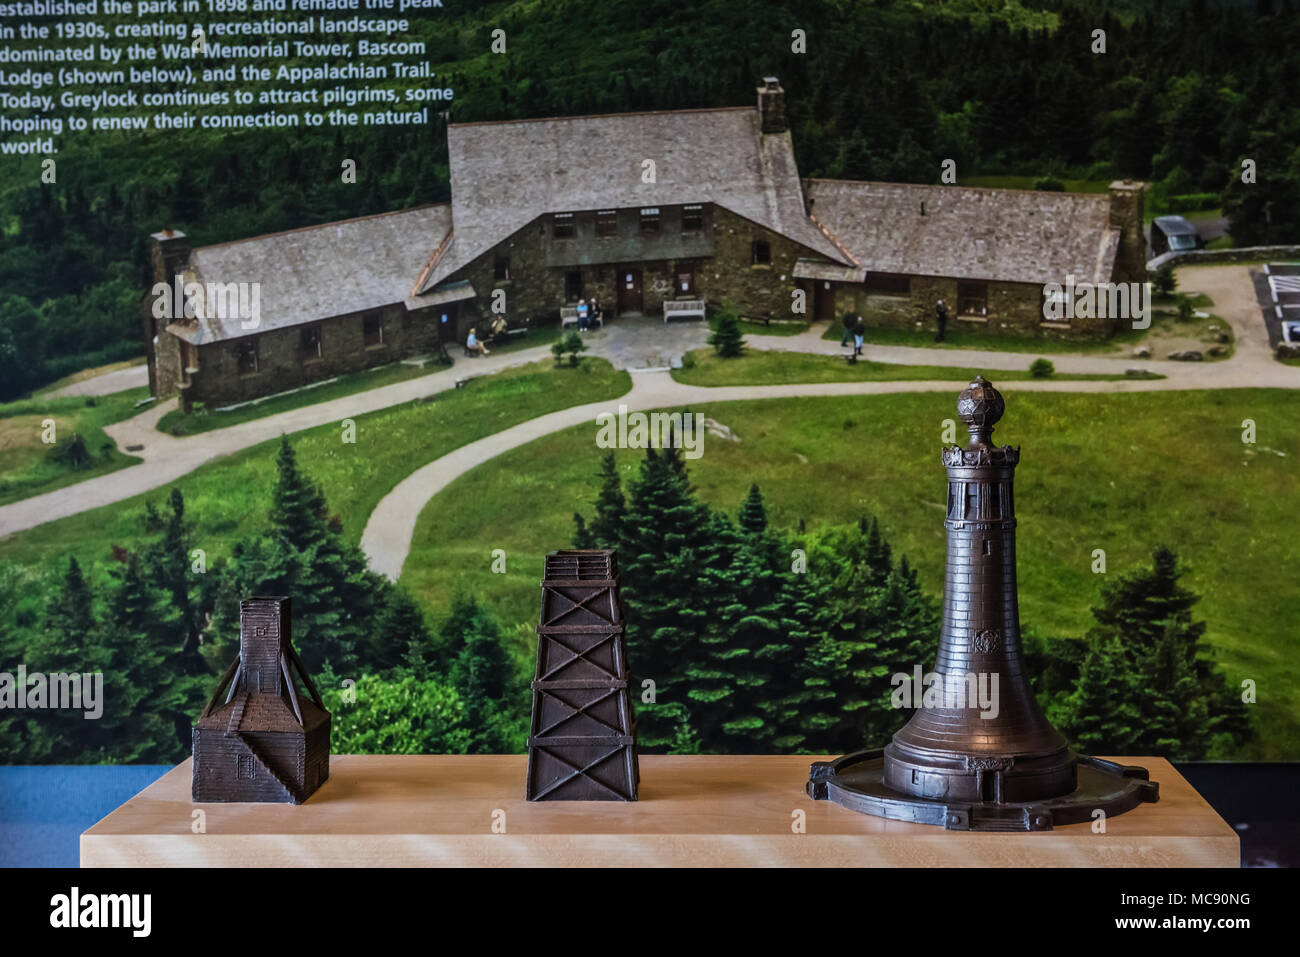 Sized to scale model of Memorial Tower at Mount Greylock Visitor Center in Lanesboro, MA. Stock Photo